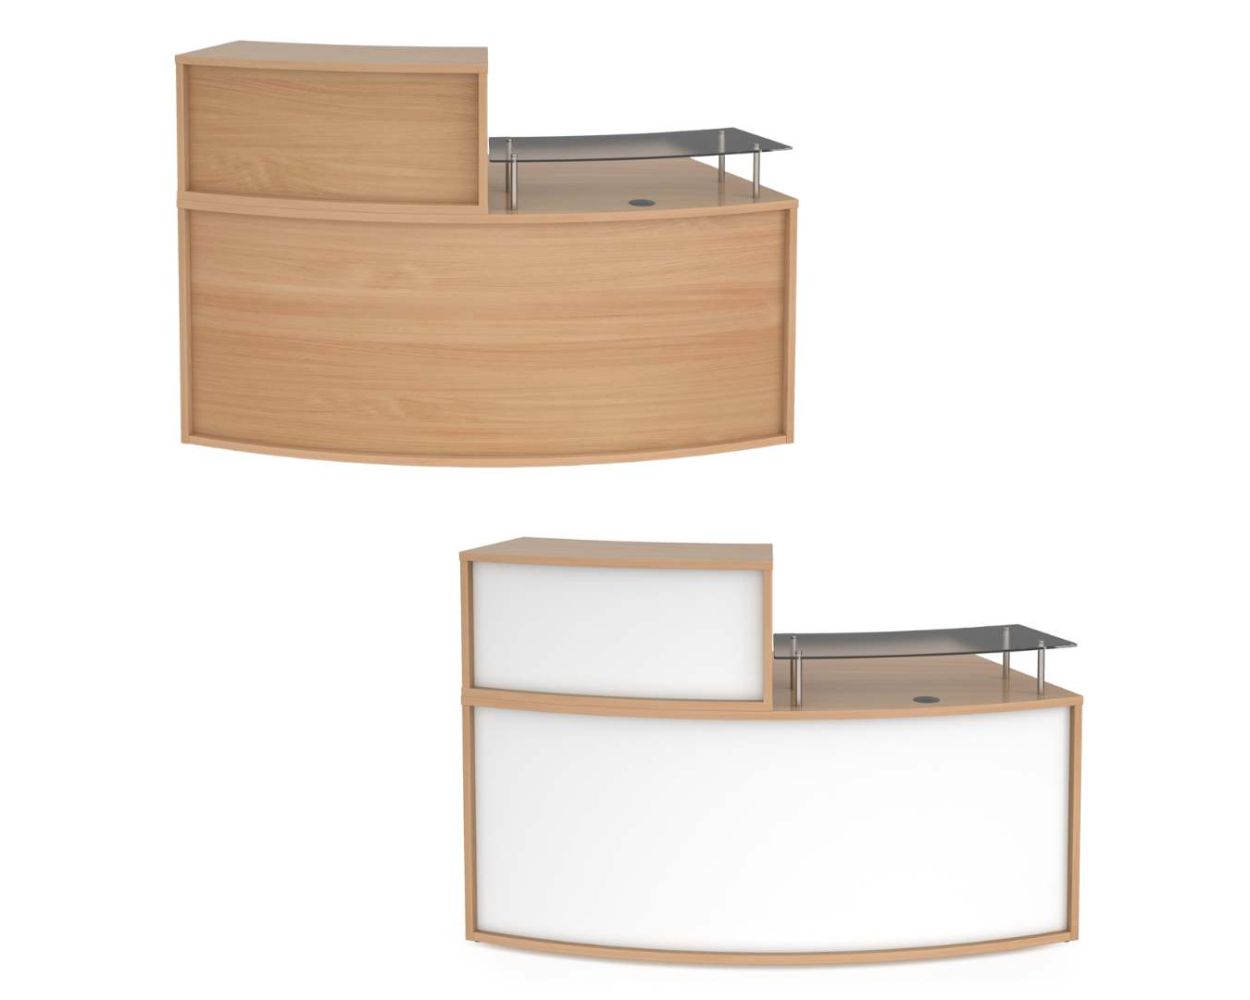 Derby Curved Reception Desk with counter top and glass shelf 1800 x 800 Beech and White